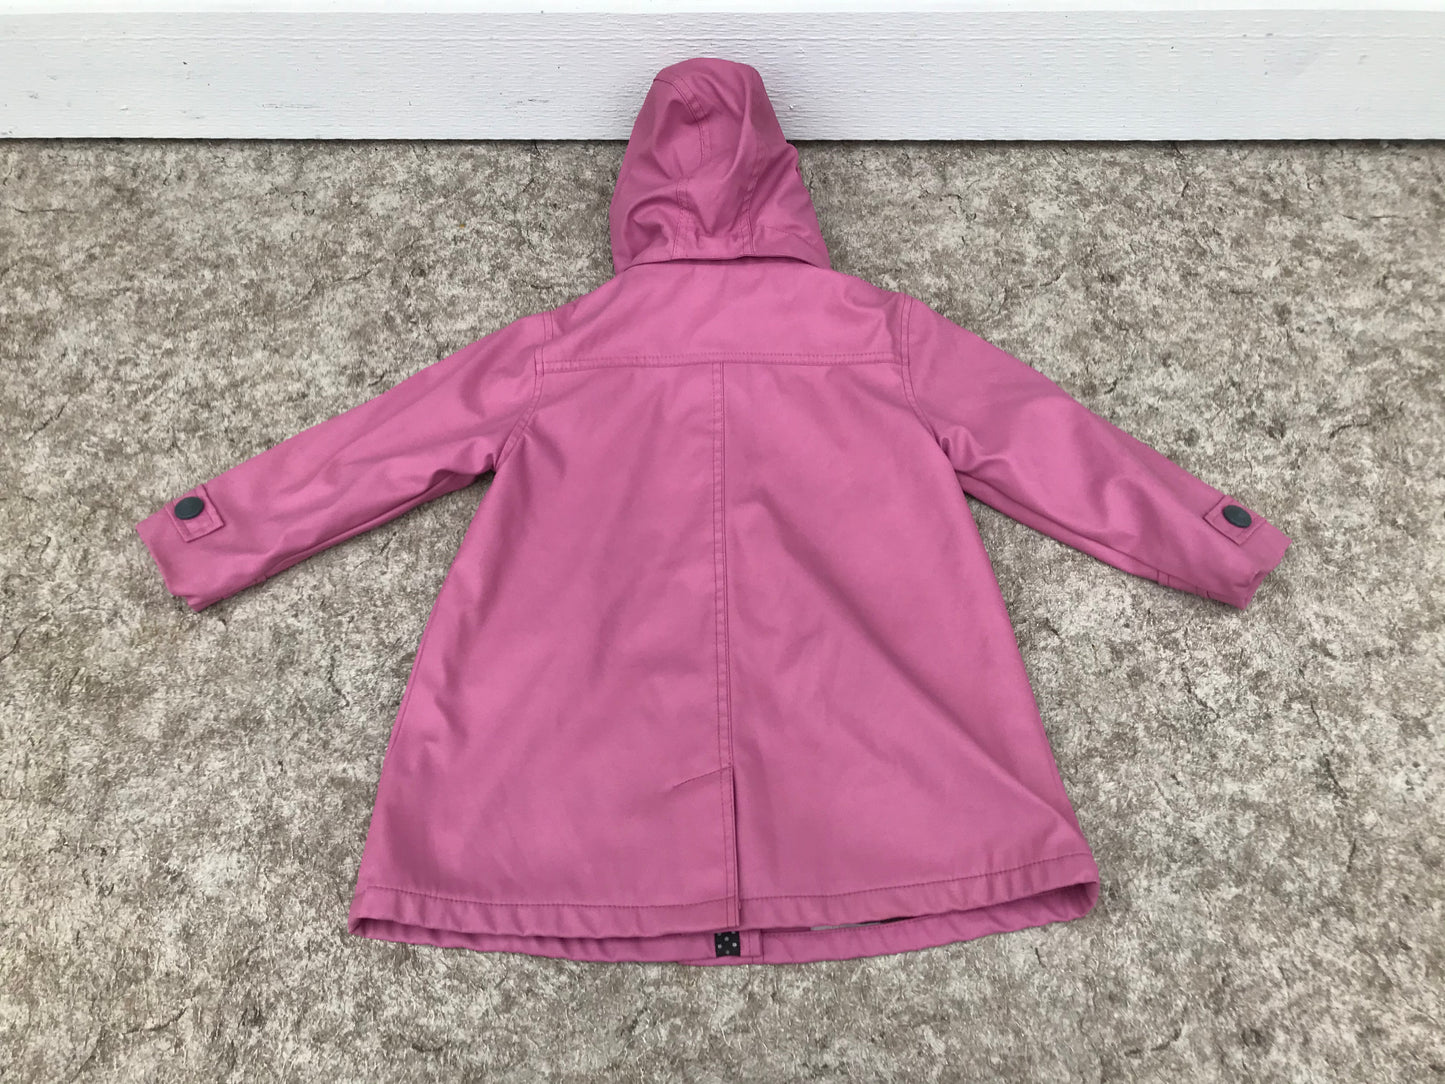 Rain Coat Child Size 4 Hatley Pink With Black White Lined